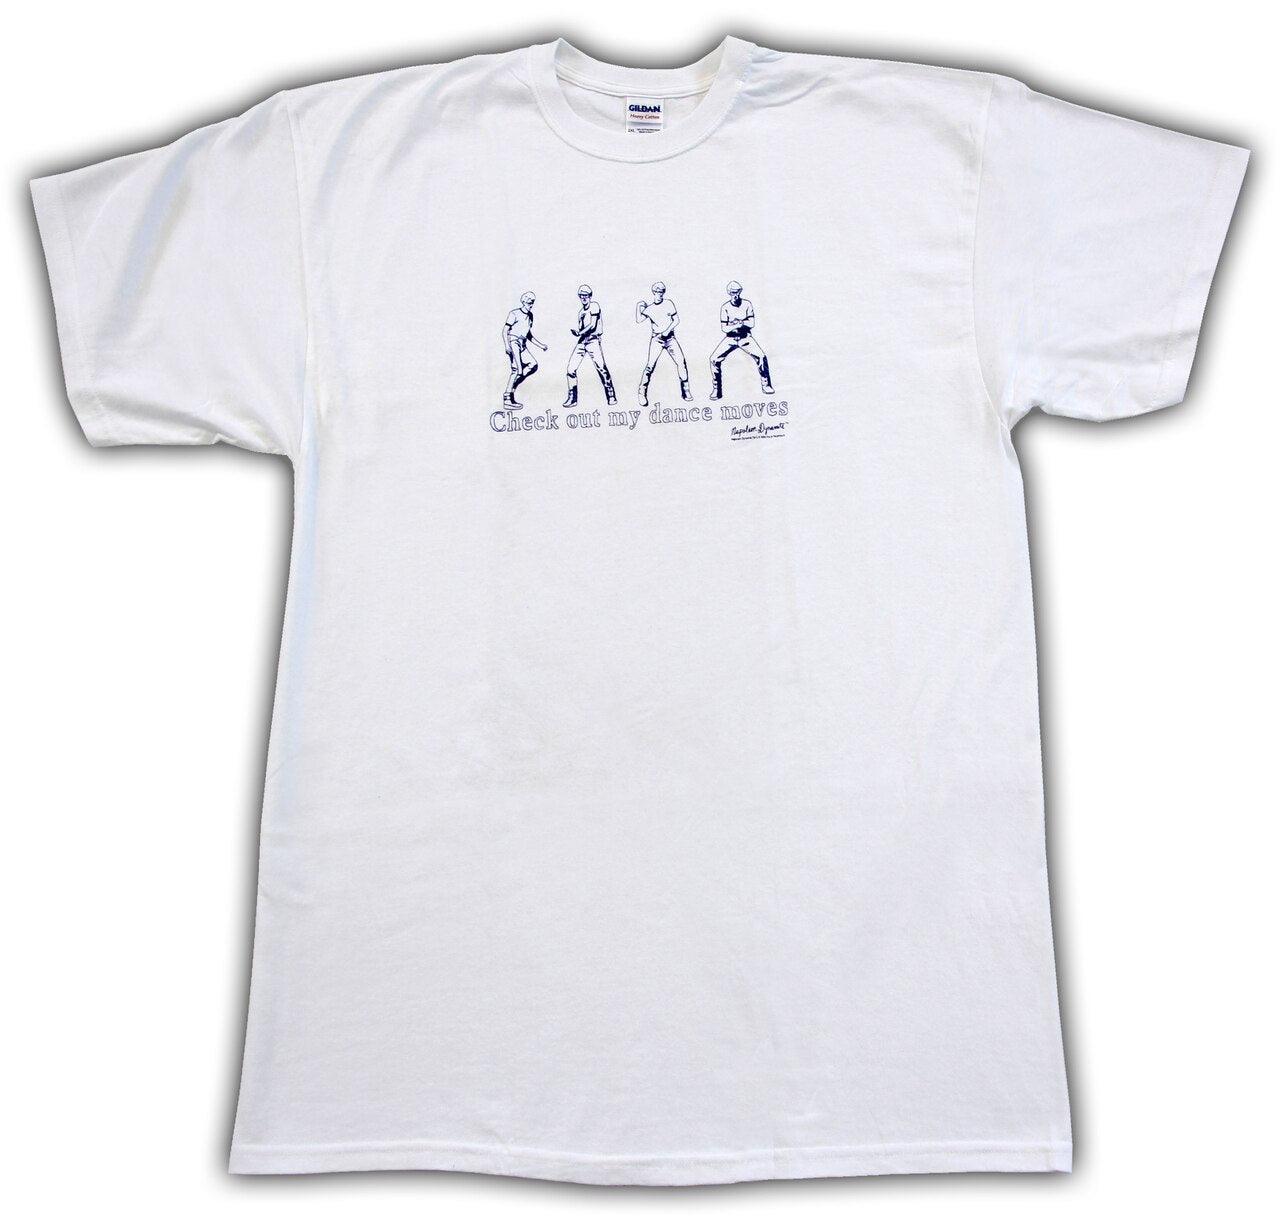 Napoleon Dynamite Check Out My Dance Moves T-shirt-tvso